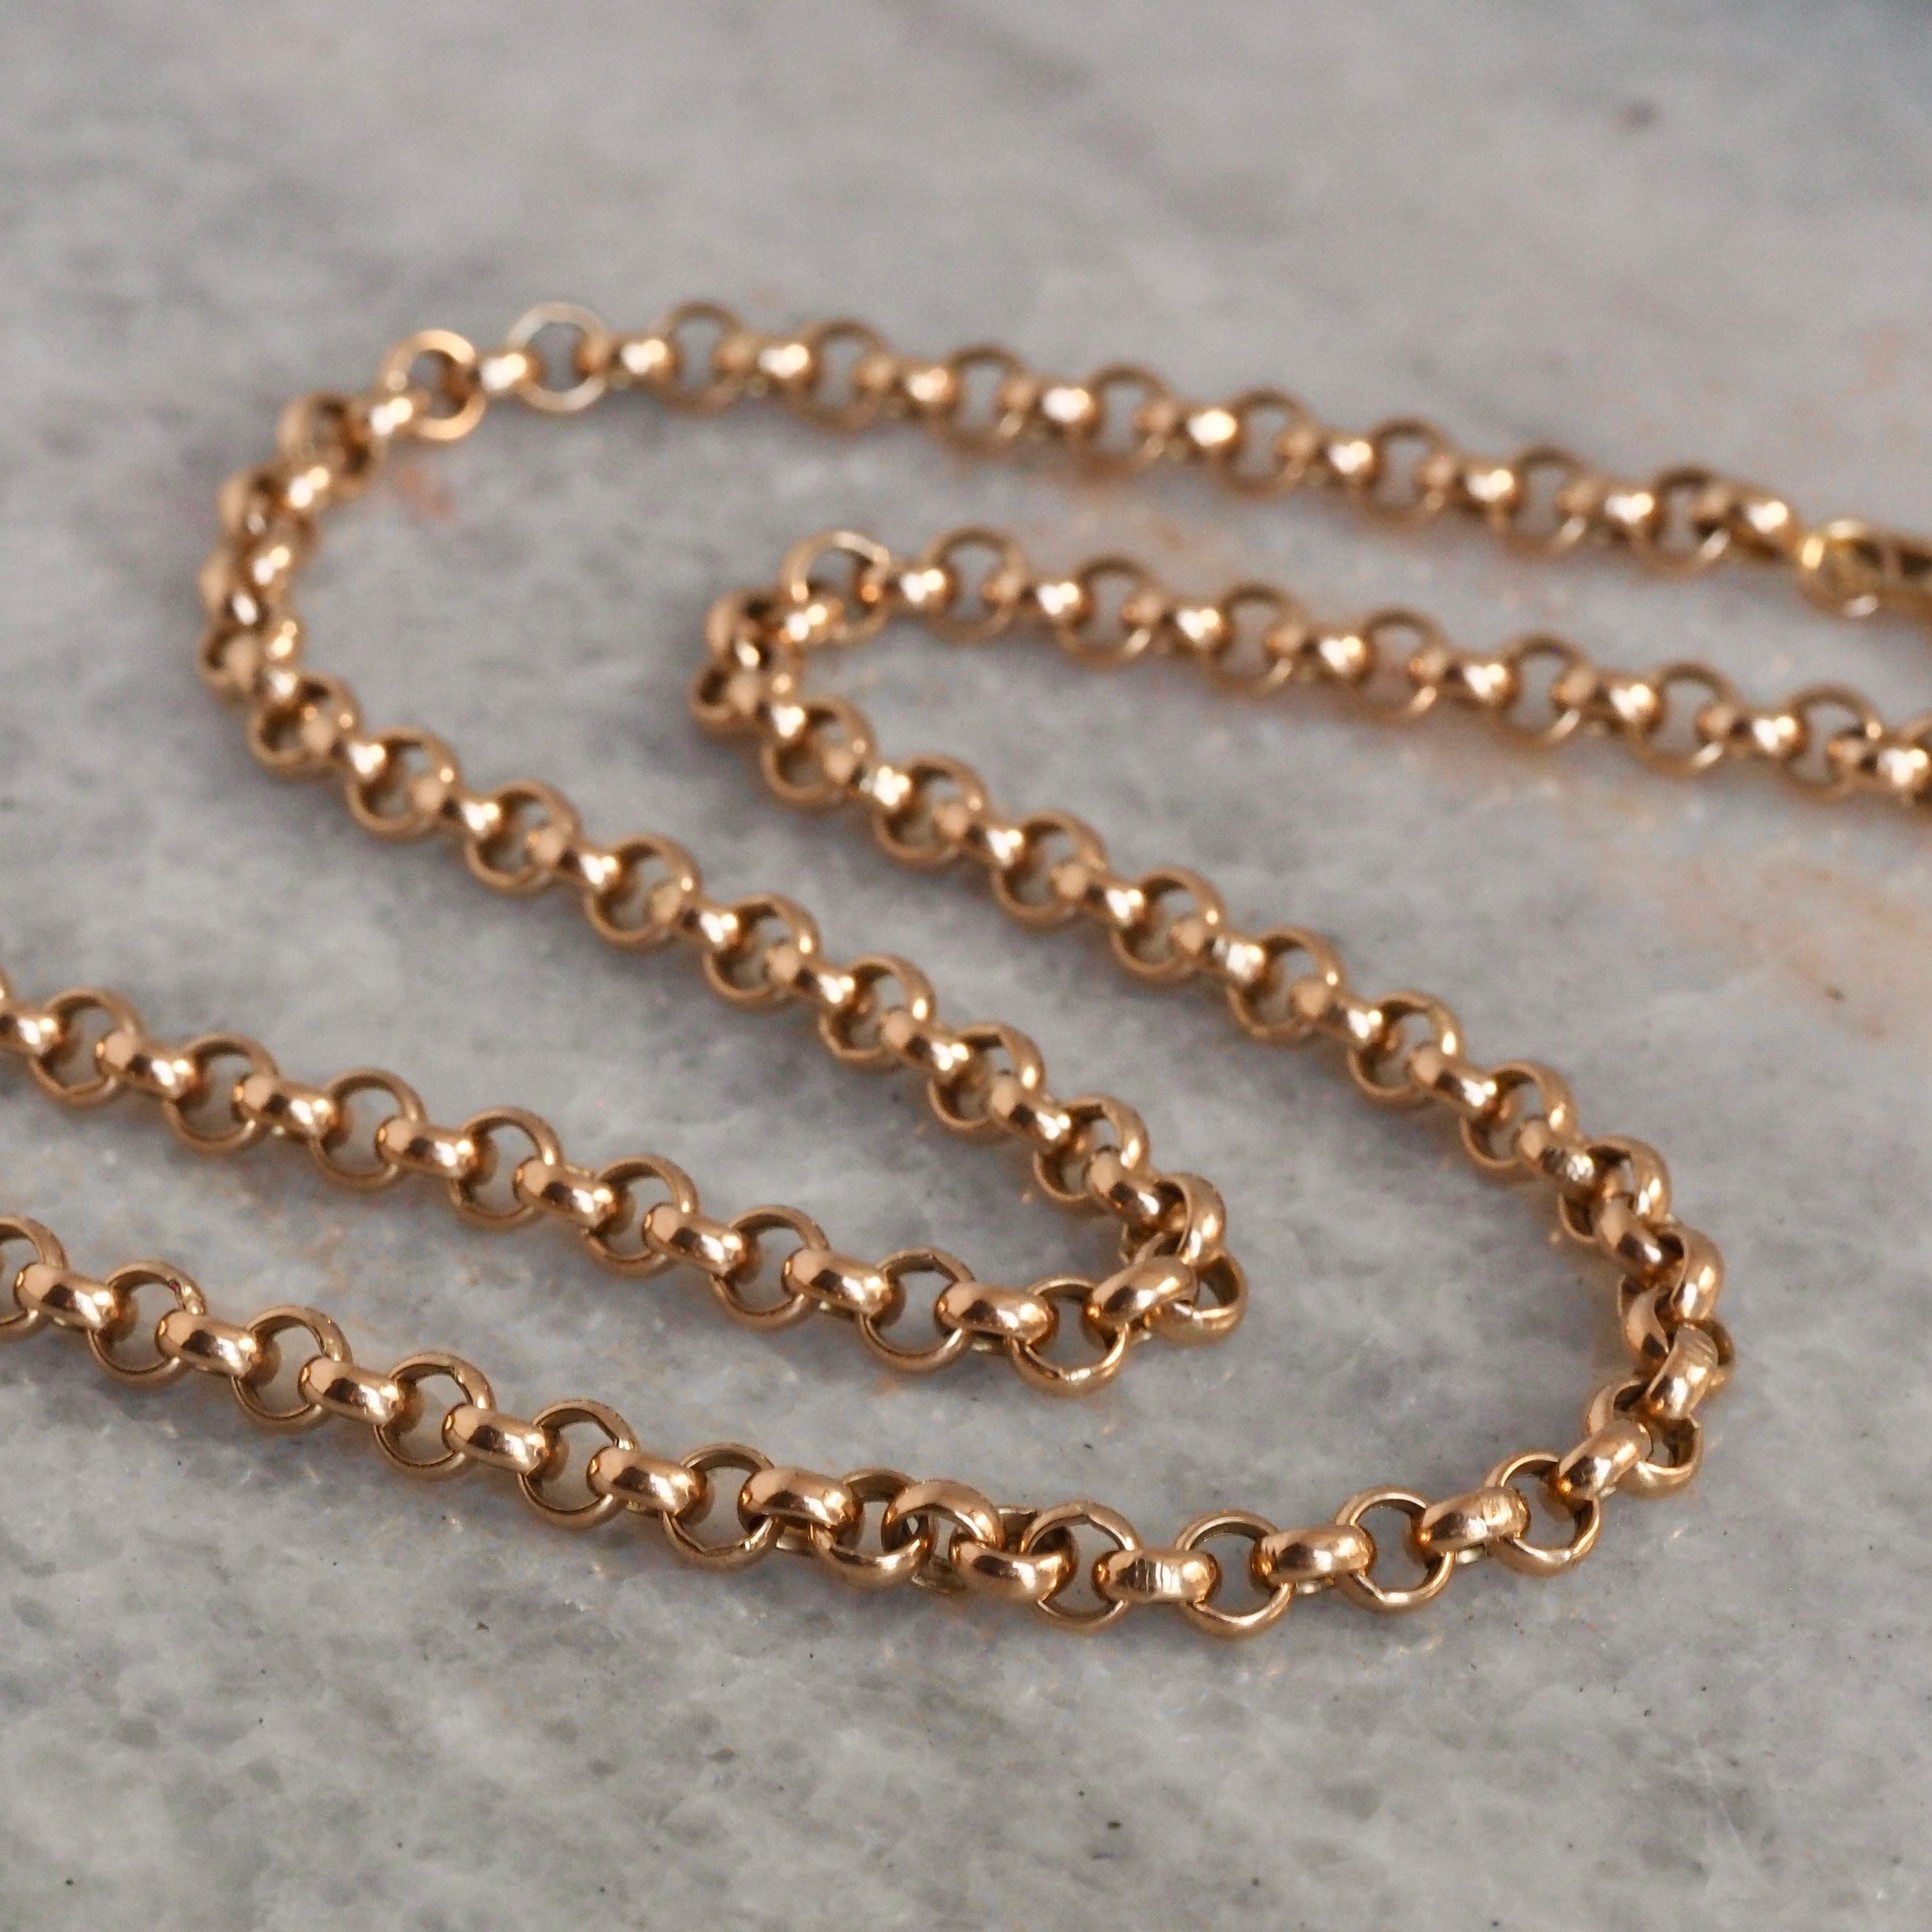 Vintage English 9k Gold 18" Rolo Chain :)